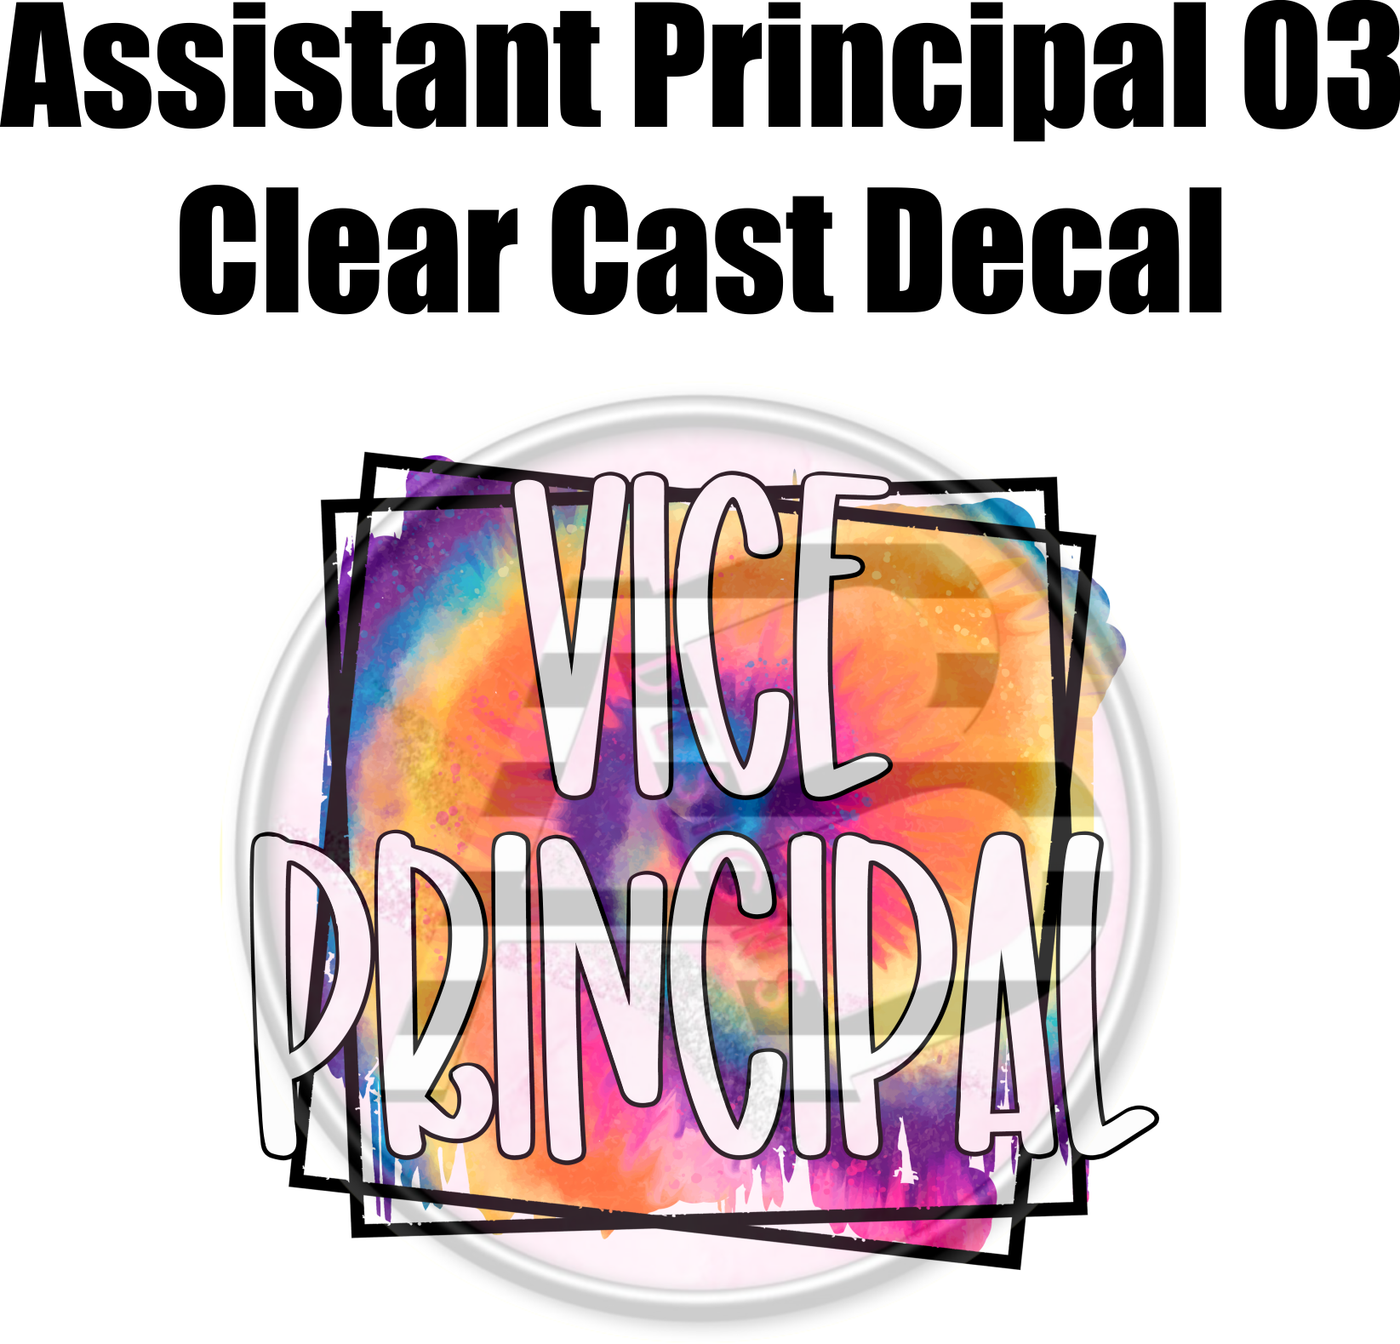 Assistant Principal 03 - Clear Cast Decal - 51